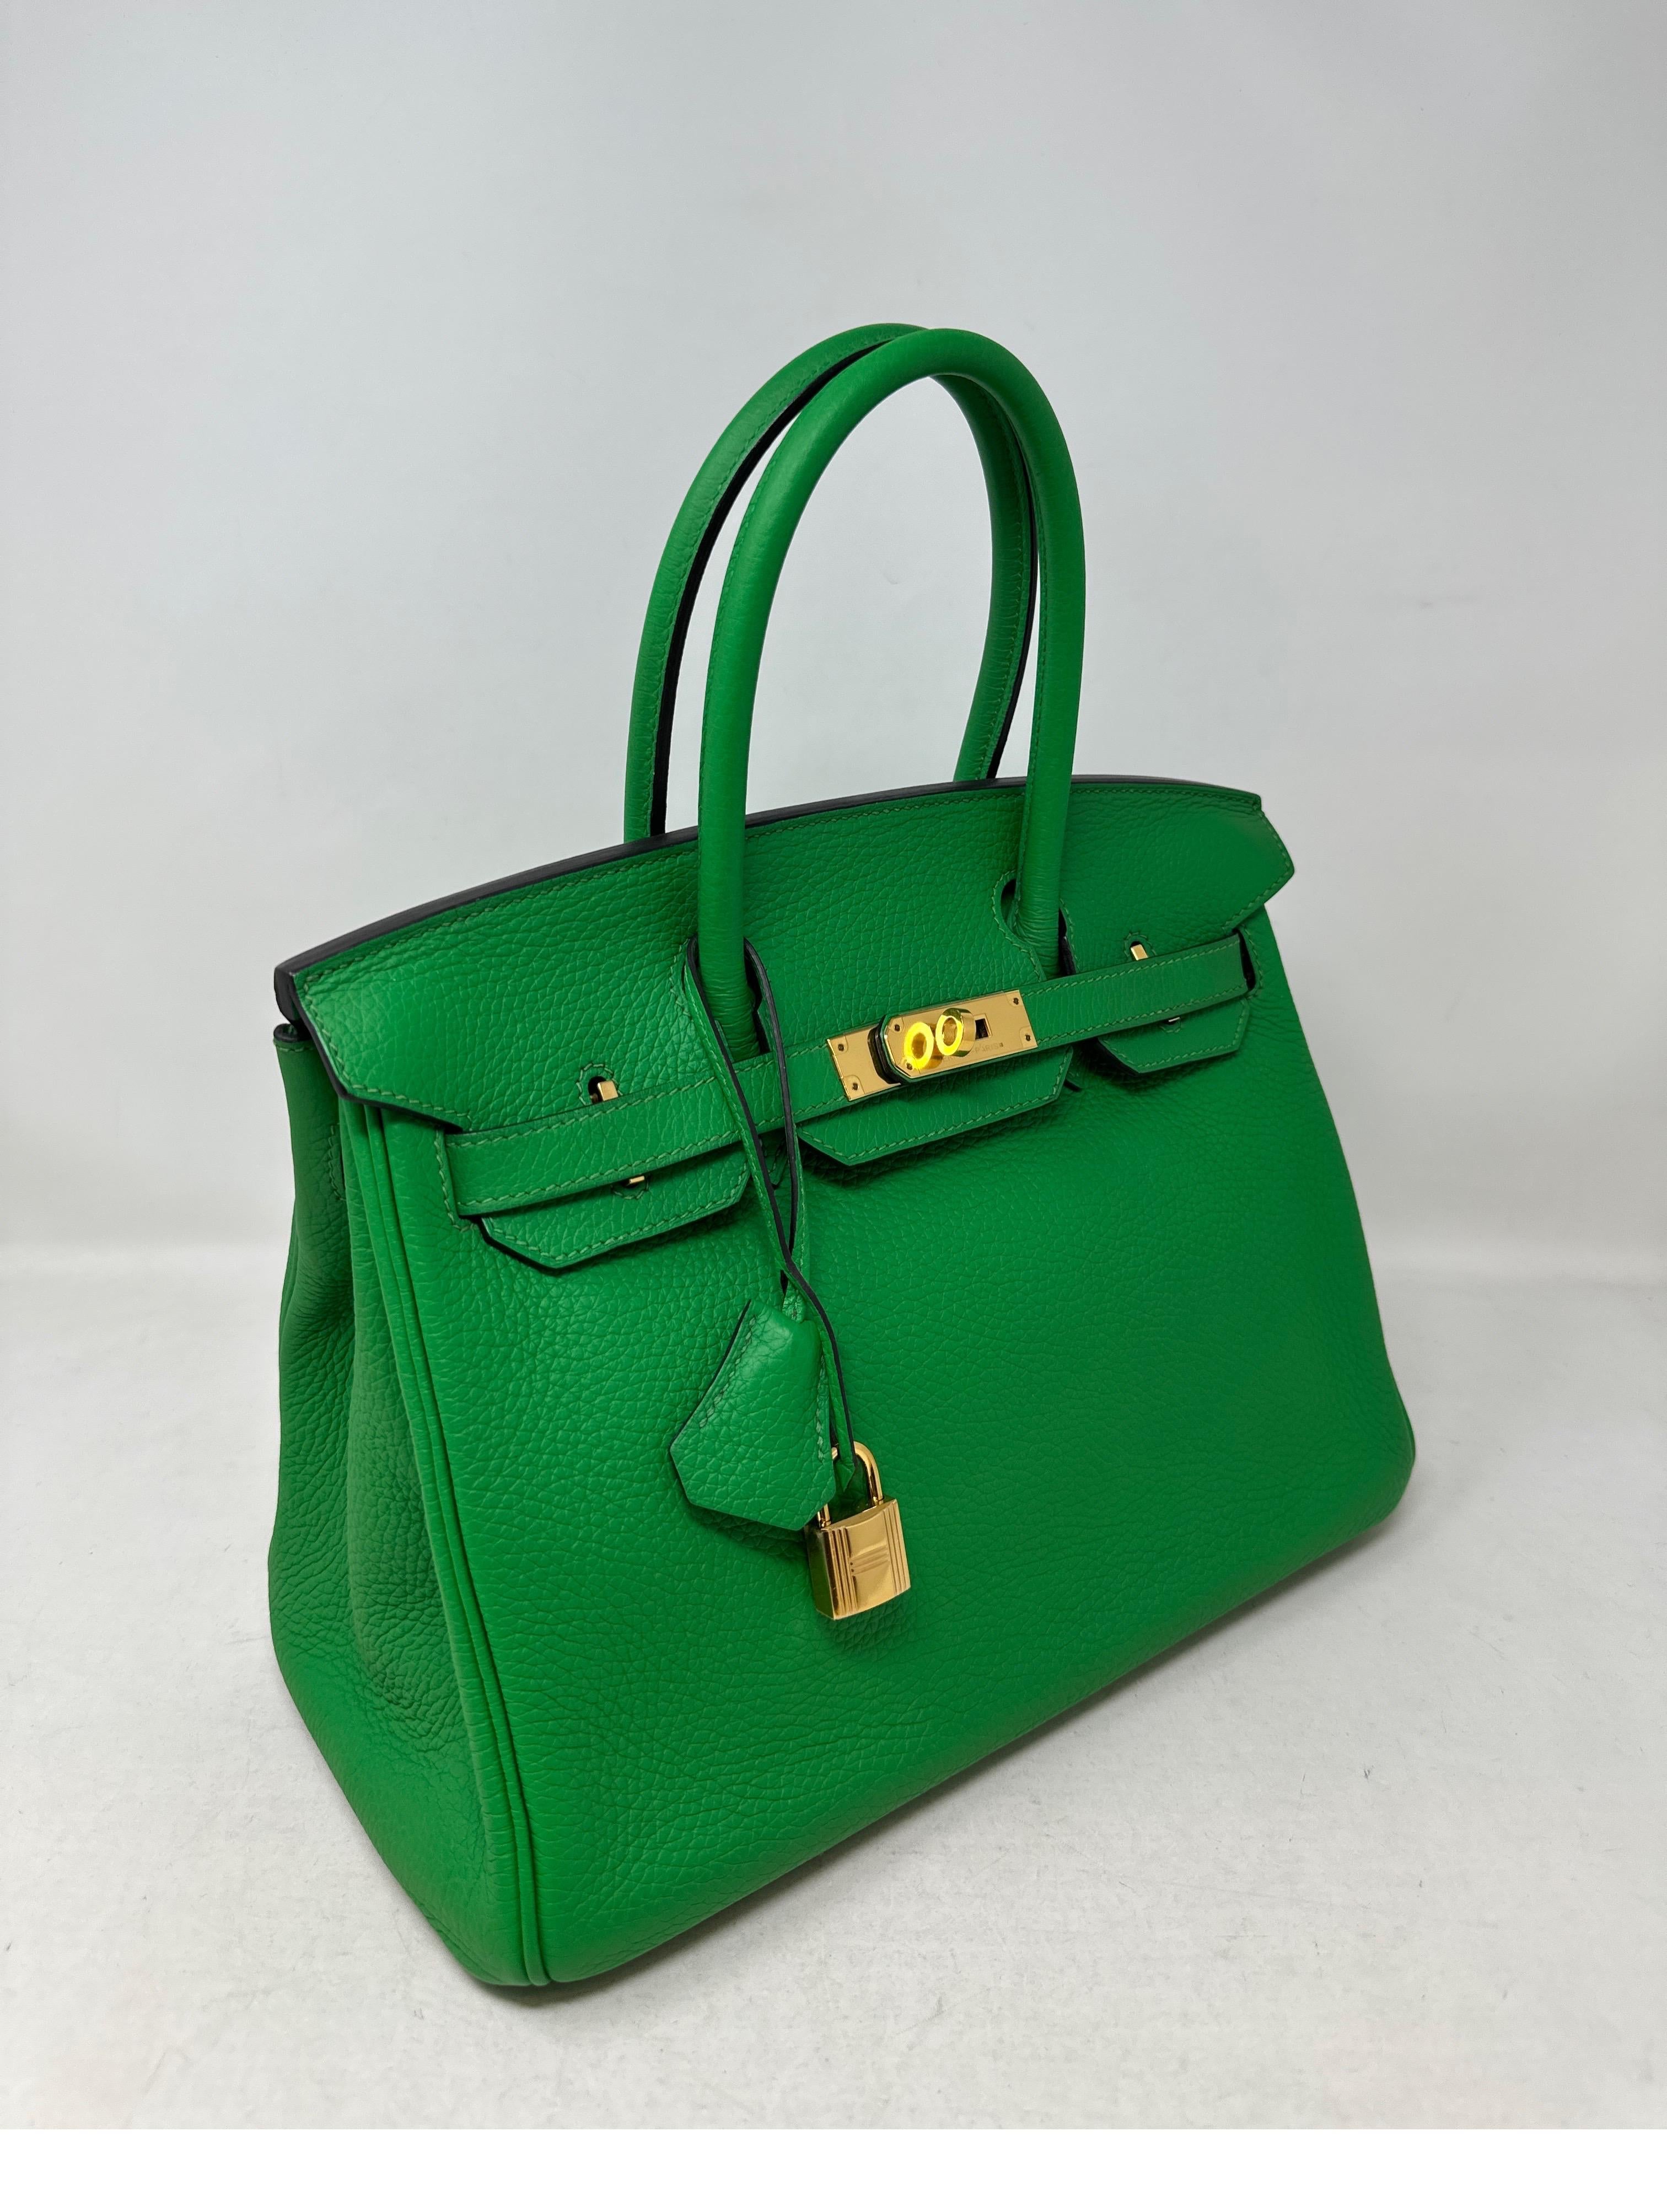 Hermes Birkin 30 Bamboo Birkin Bag. Excellent condition. Gold hardware. Rare and most wanted green color. Size is most desired too. Interior clean. Includes clochette, lock, keys, and dust bag. Guaranteed authentic. 